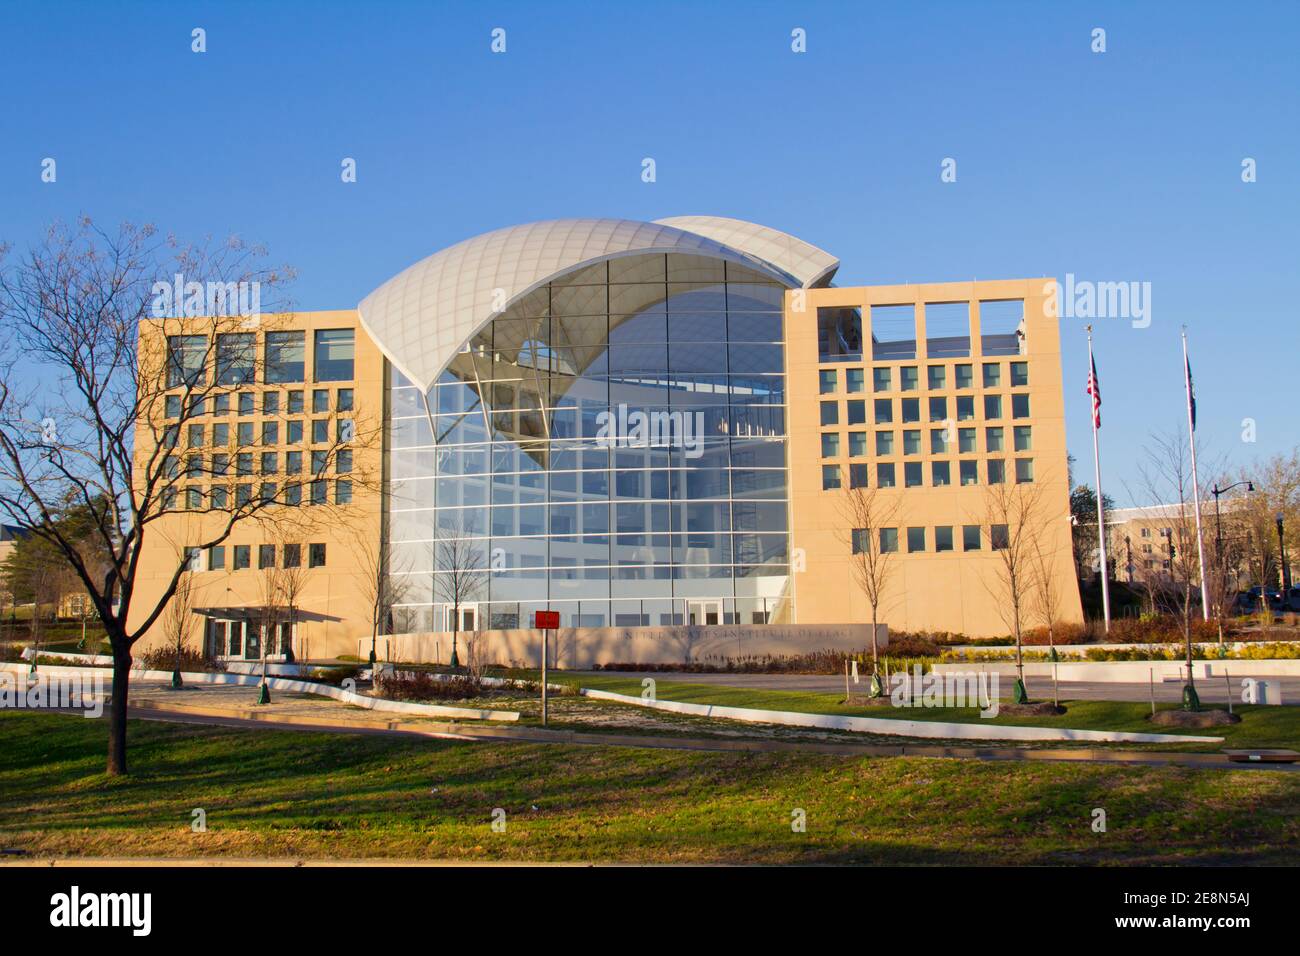 Headquarters of US Institute of Peace in Washington DC on. Designed by Moshe Safdie, opened in March 2011 Stock Photo